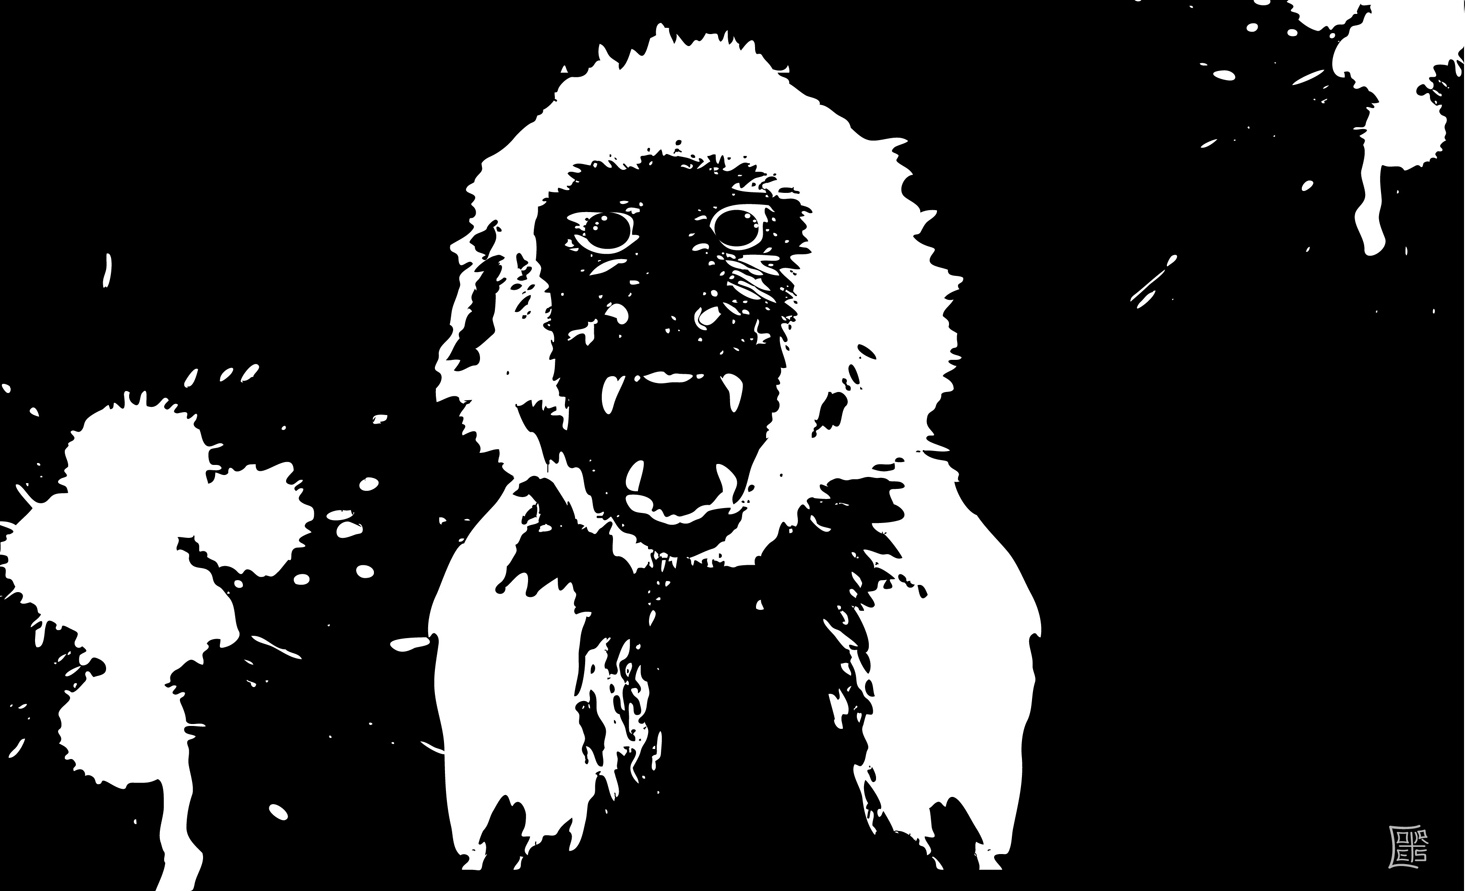 Angry Monkey Silhouette Vector - Download Free Vector